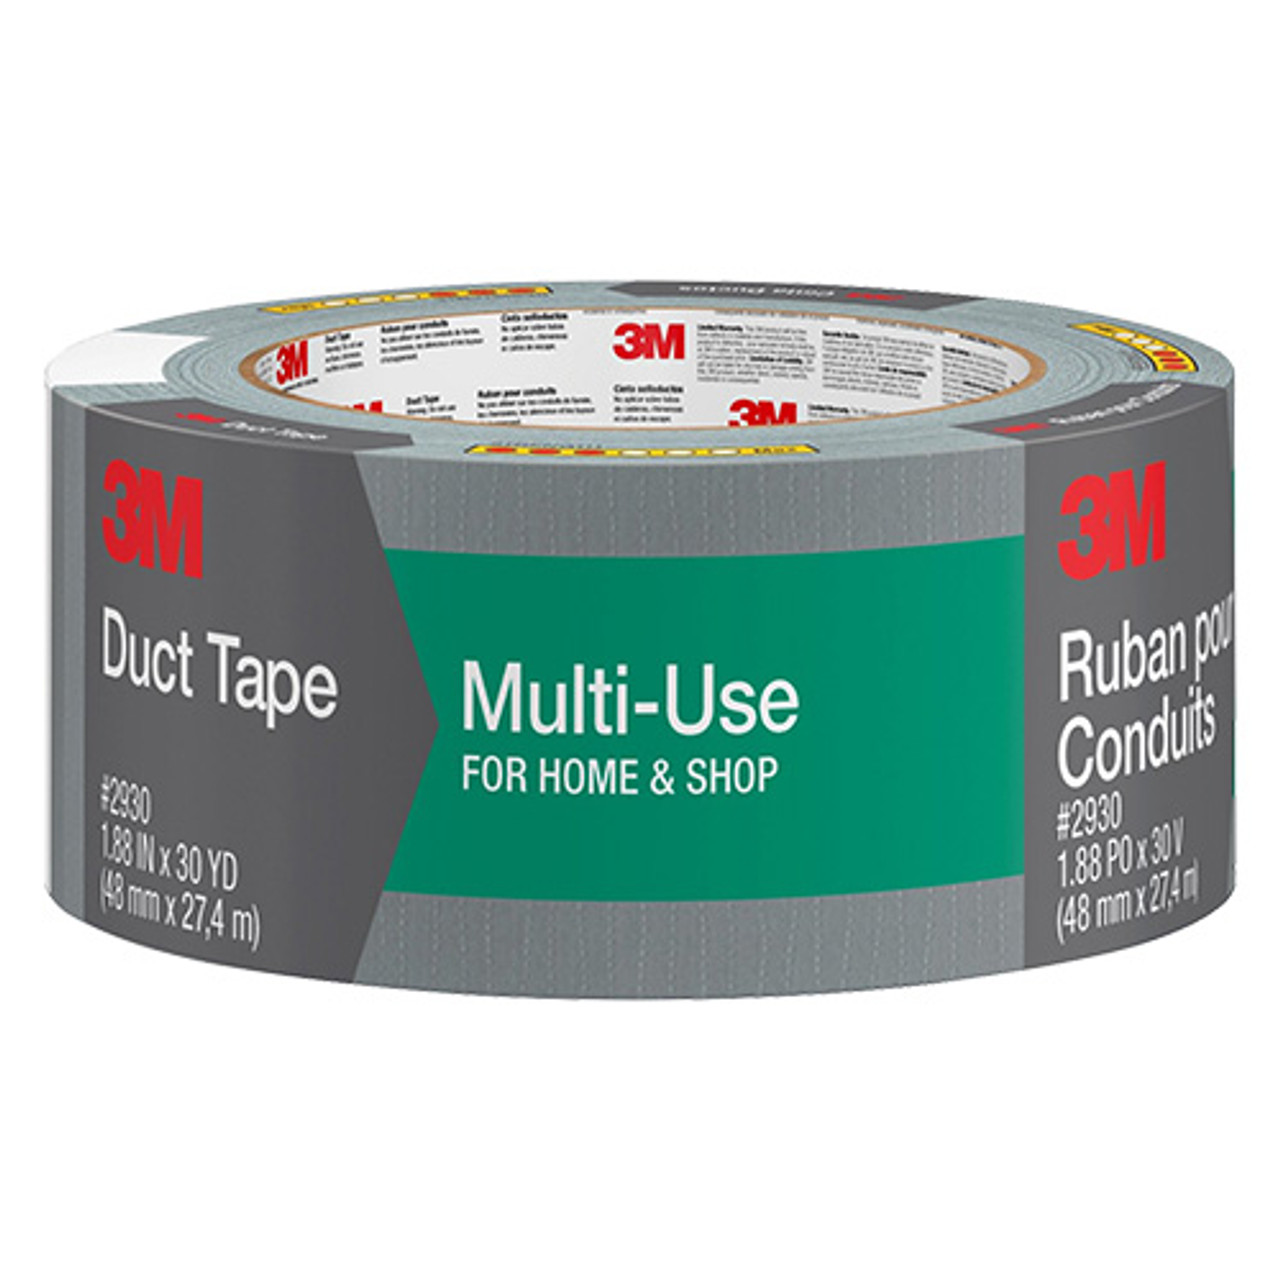 Duct Tape, Yellow, 1.88 x 20-yd., 3M, 3920-YL